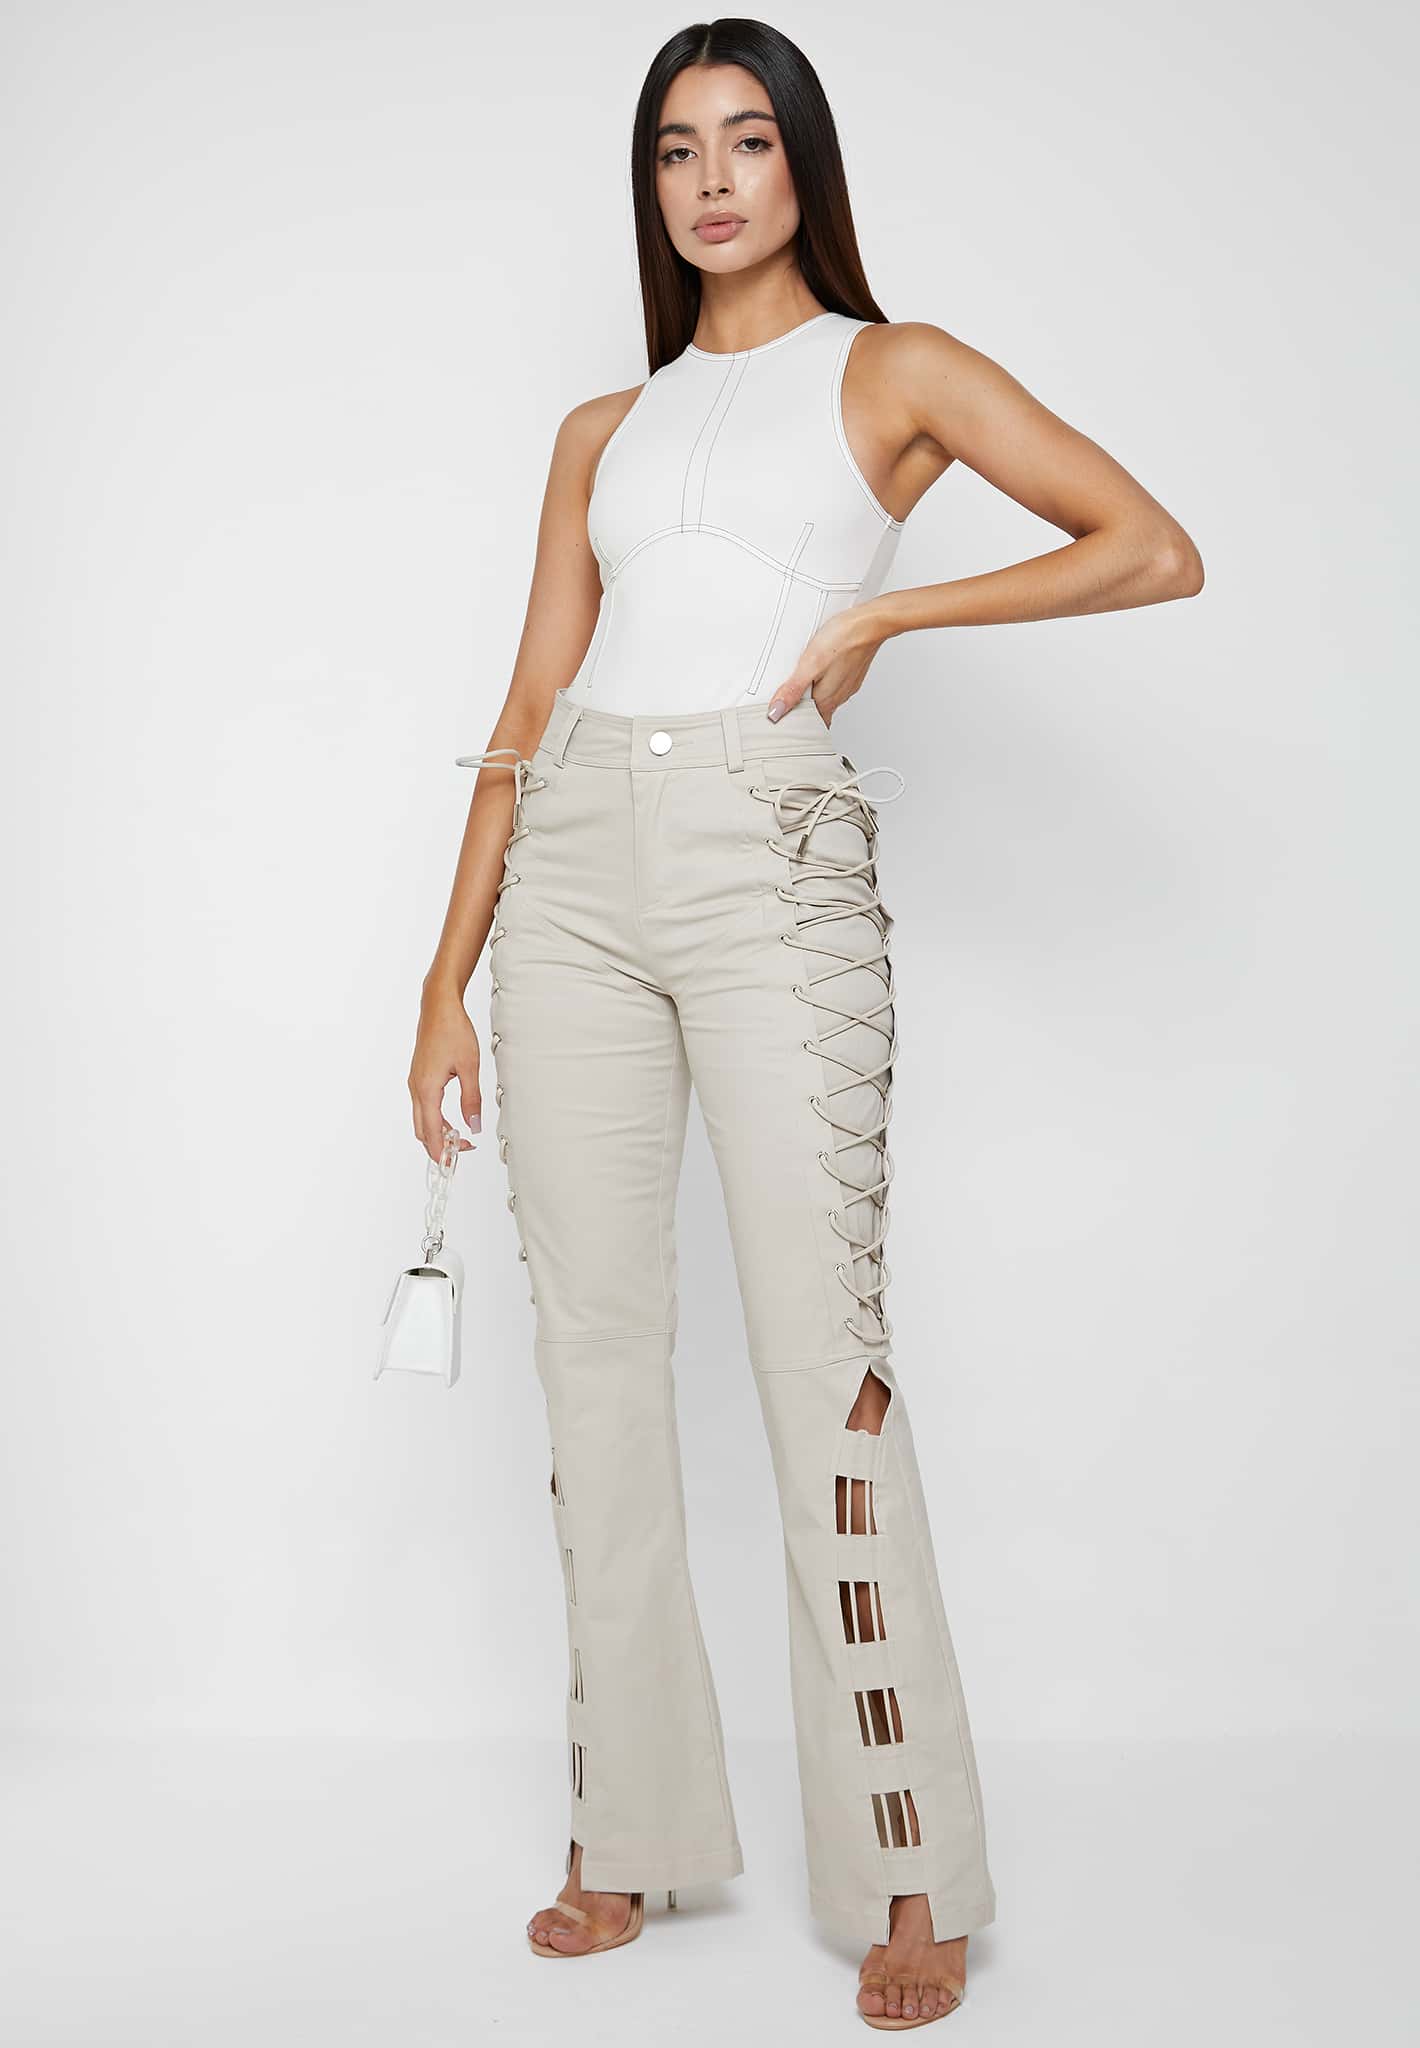 Missguided is selling £40 faux leather trousers with lace-up detailing -  and we're not sure what to make of them | The Irish Sun